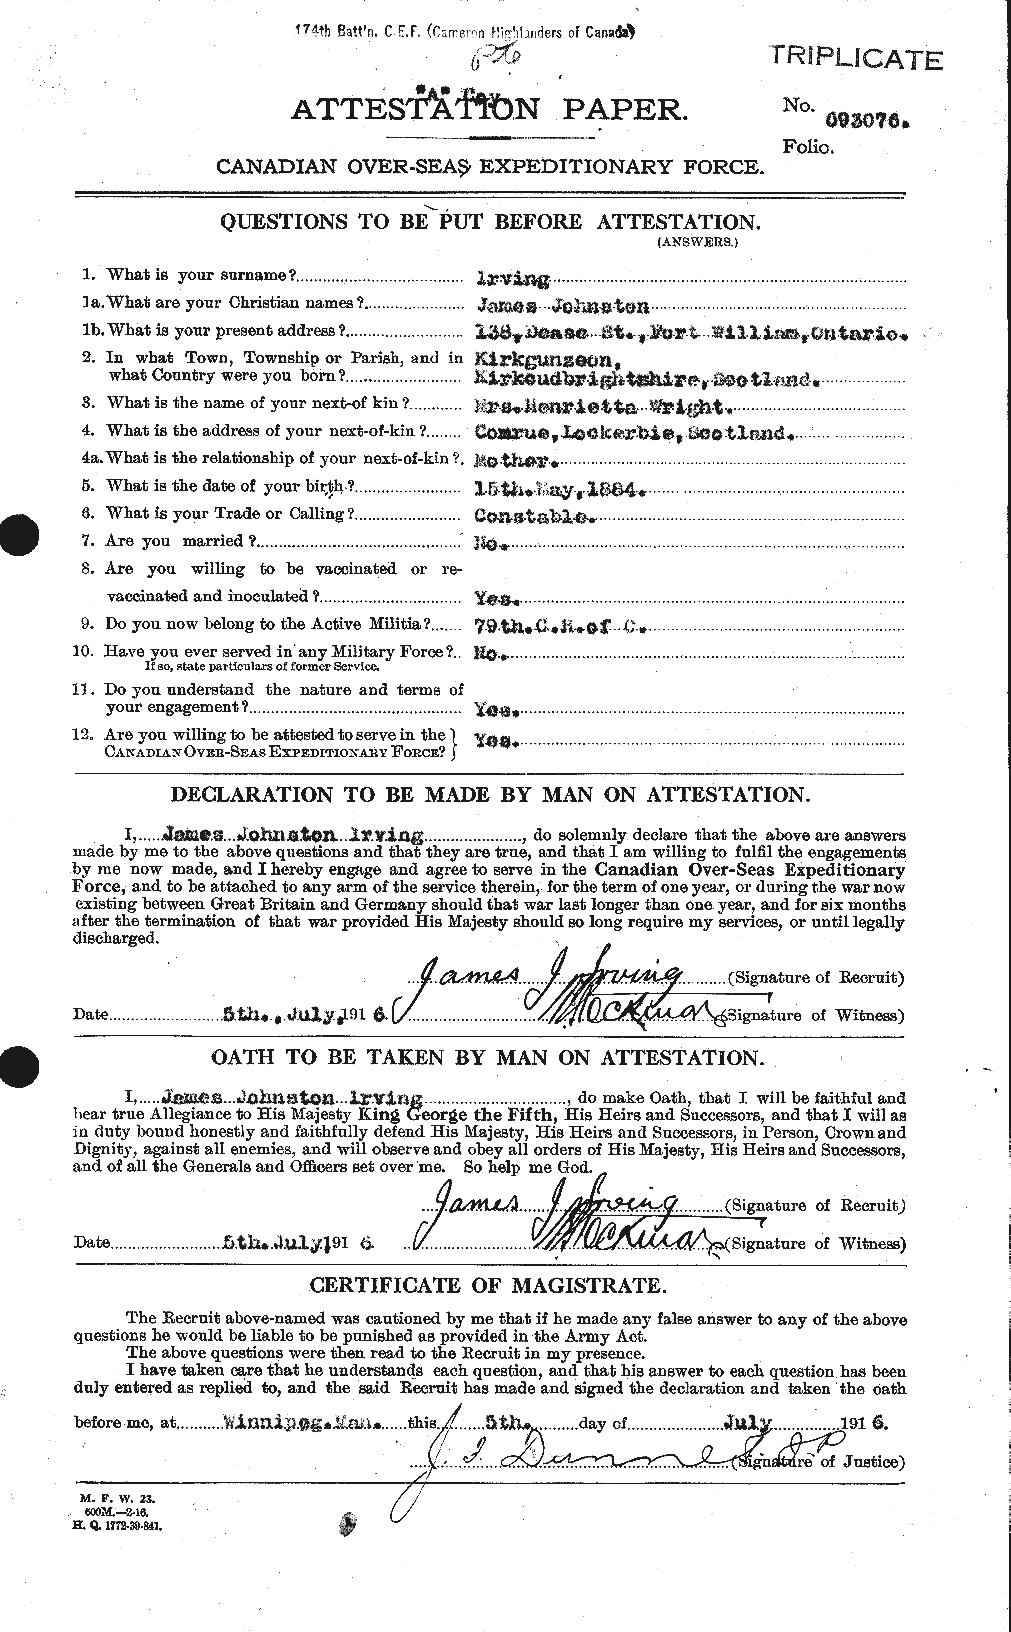 Personnel Records of the First World War - CEF 412673a